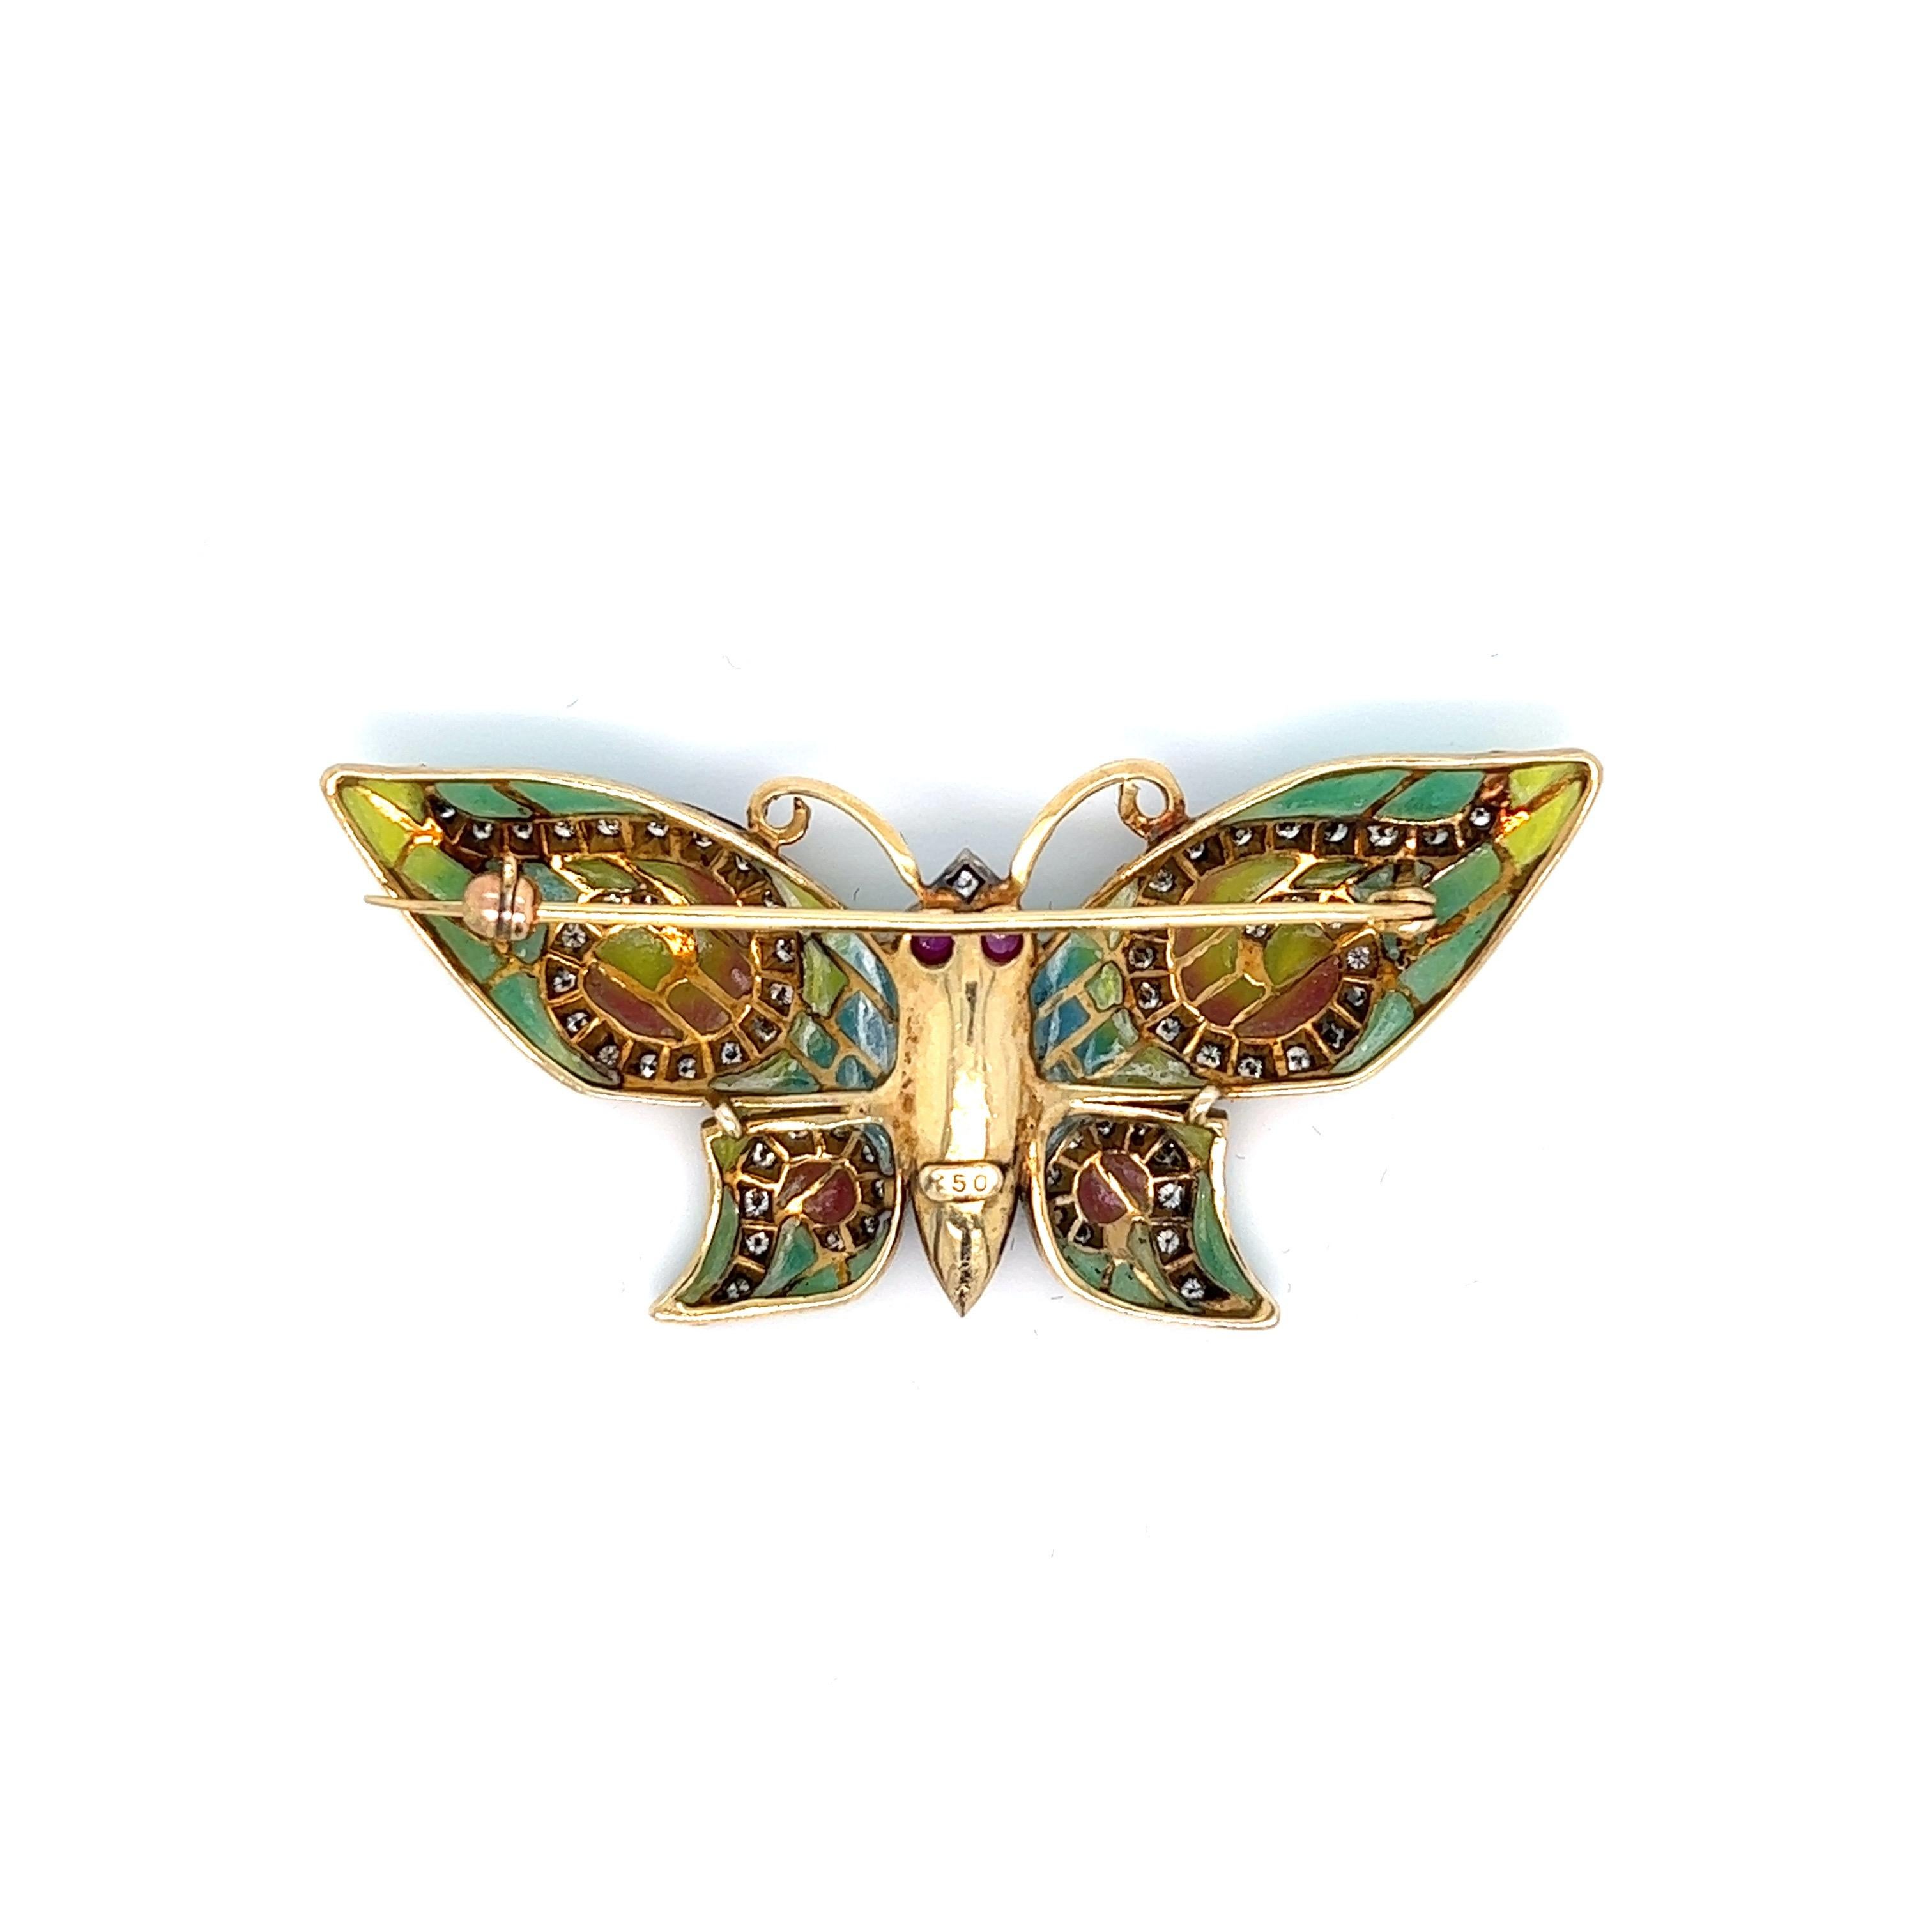 Plique-á-jour butterfly brooch; marked 750

Round-cut diamonds of approximately 1 carat, cabochon ruby eyes of approximately 0.80 carat, 18 karat yellow gold

Size: width 2.13 inches, length 1 inch
Total weight: 10.3 grams 